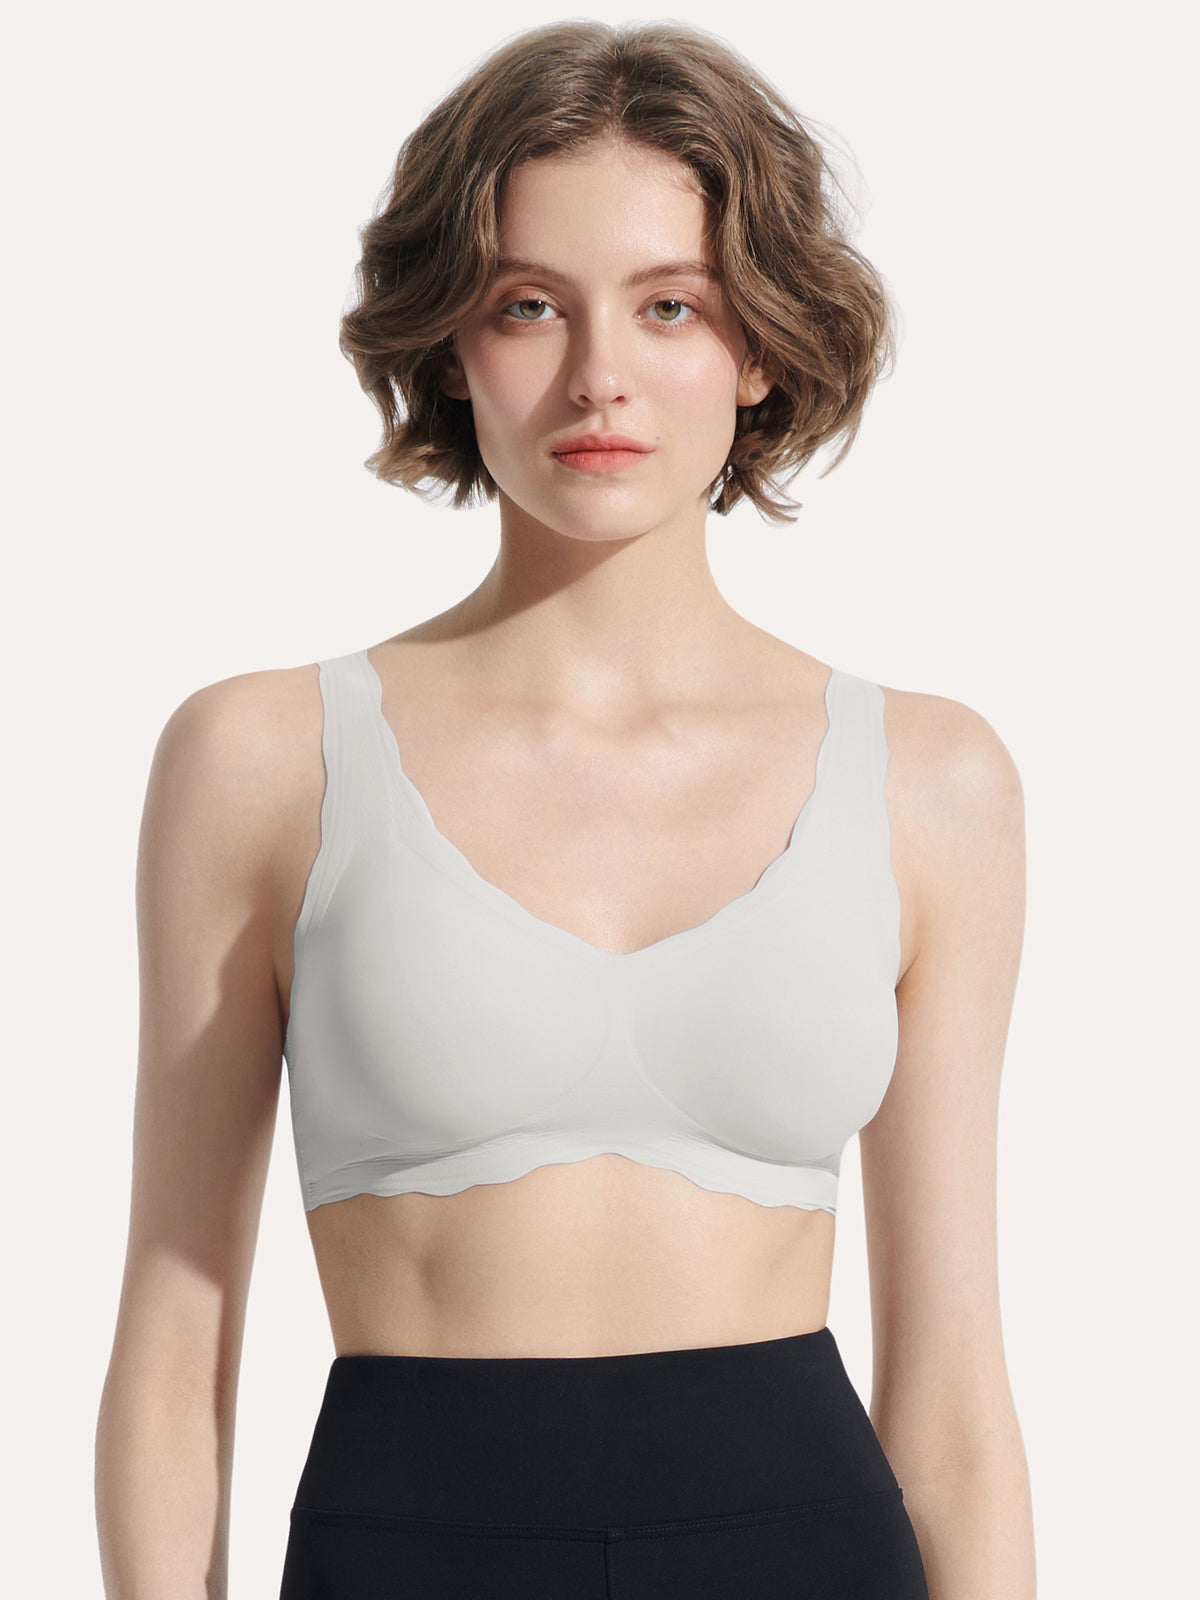 AIRBRA™ : Ultra Comfort Aire Bra – Affinity Cart